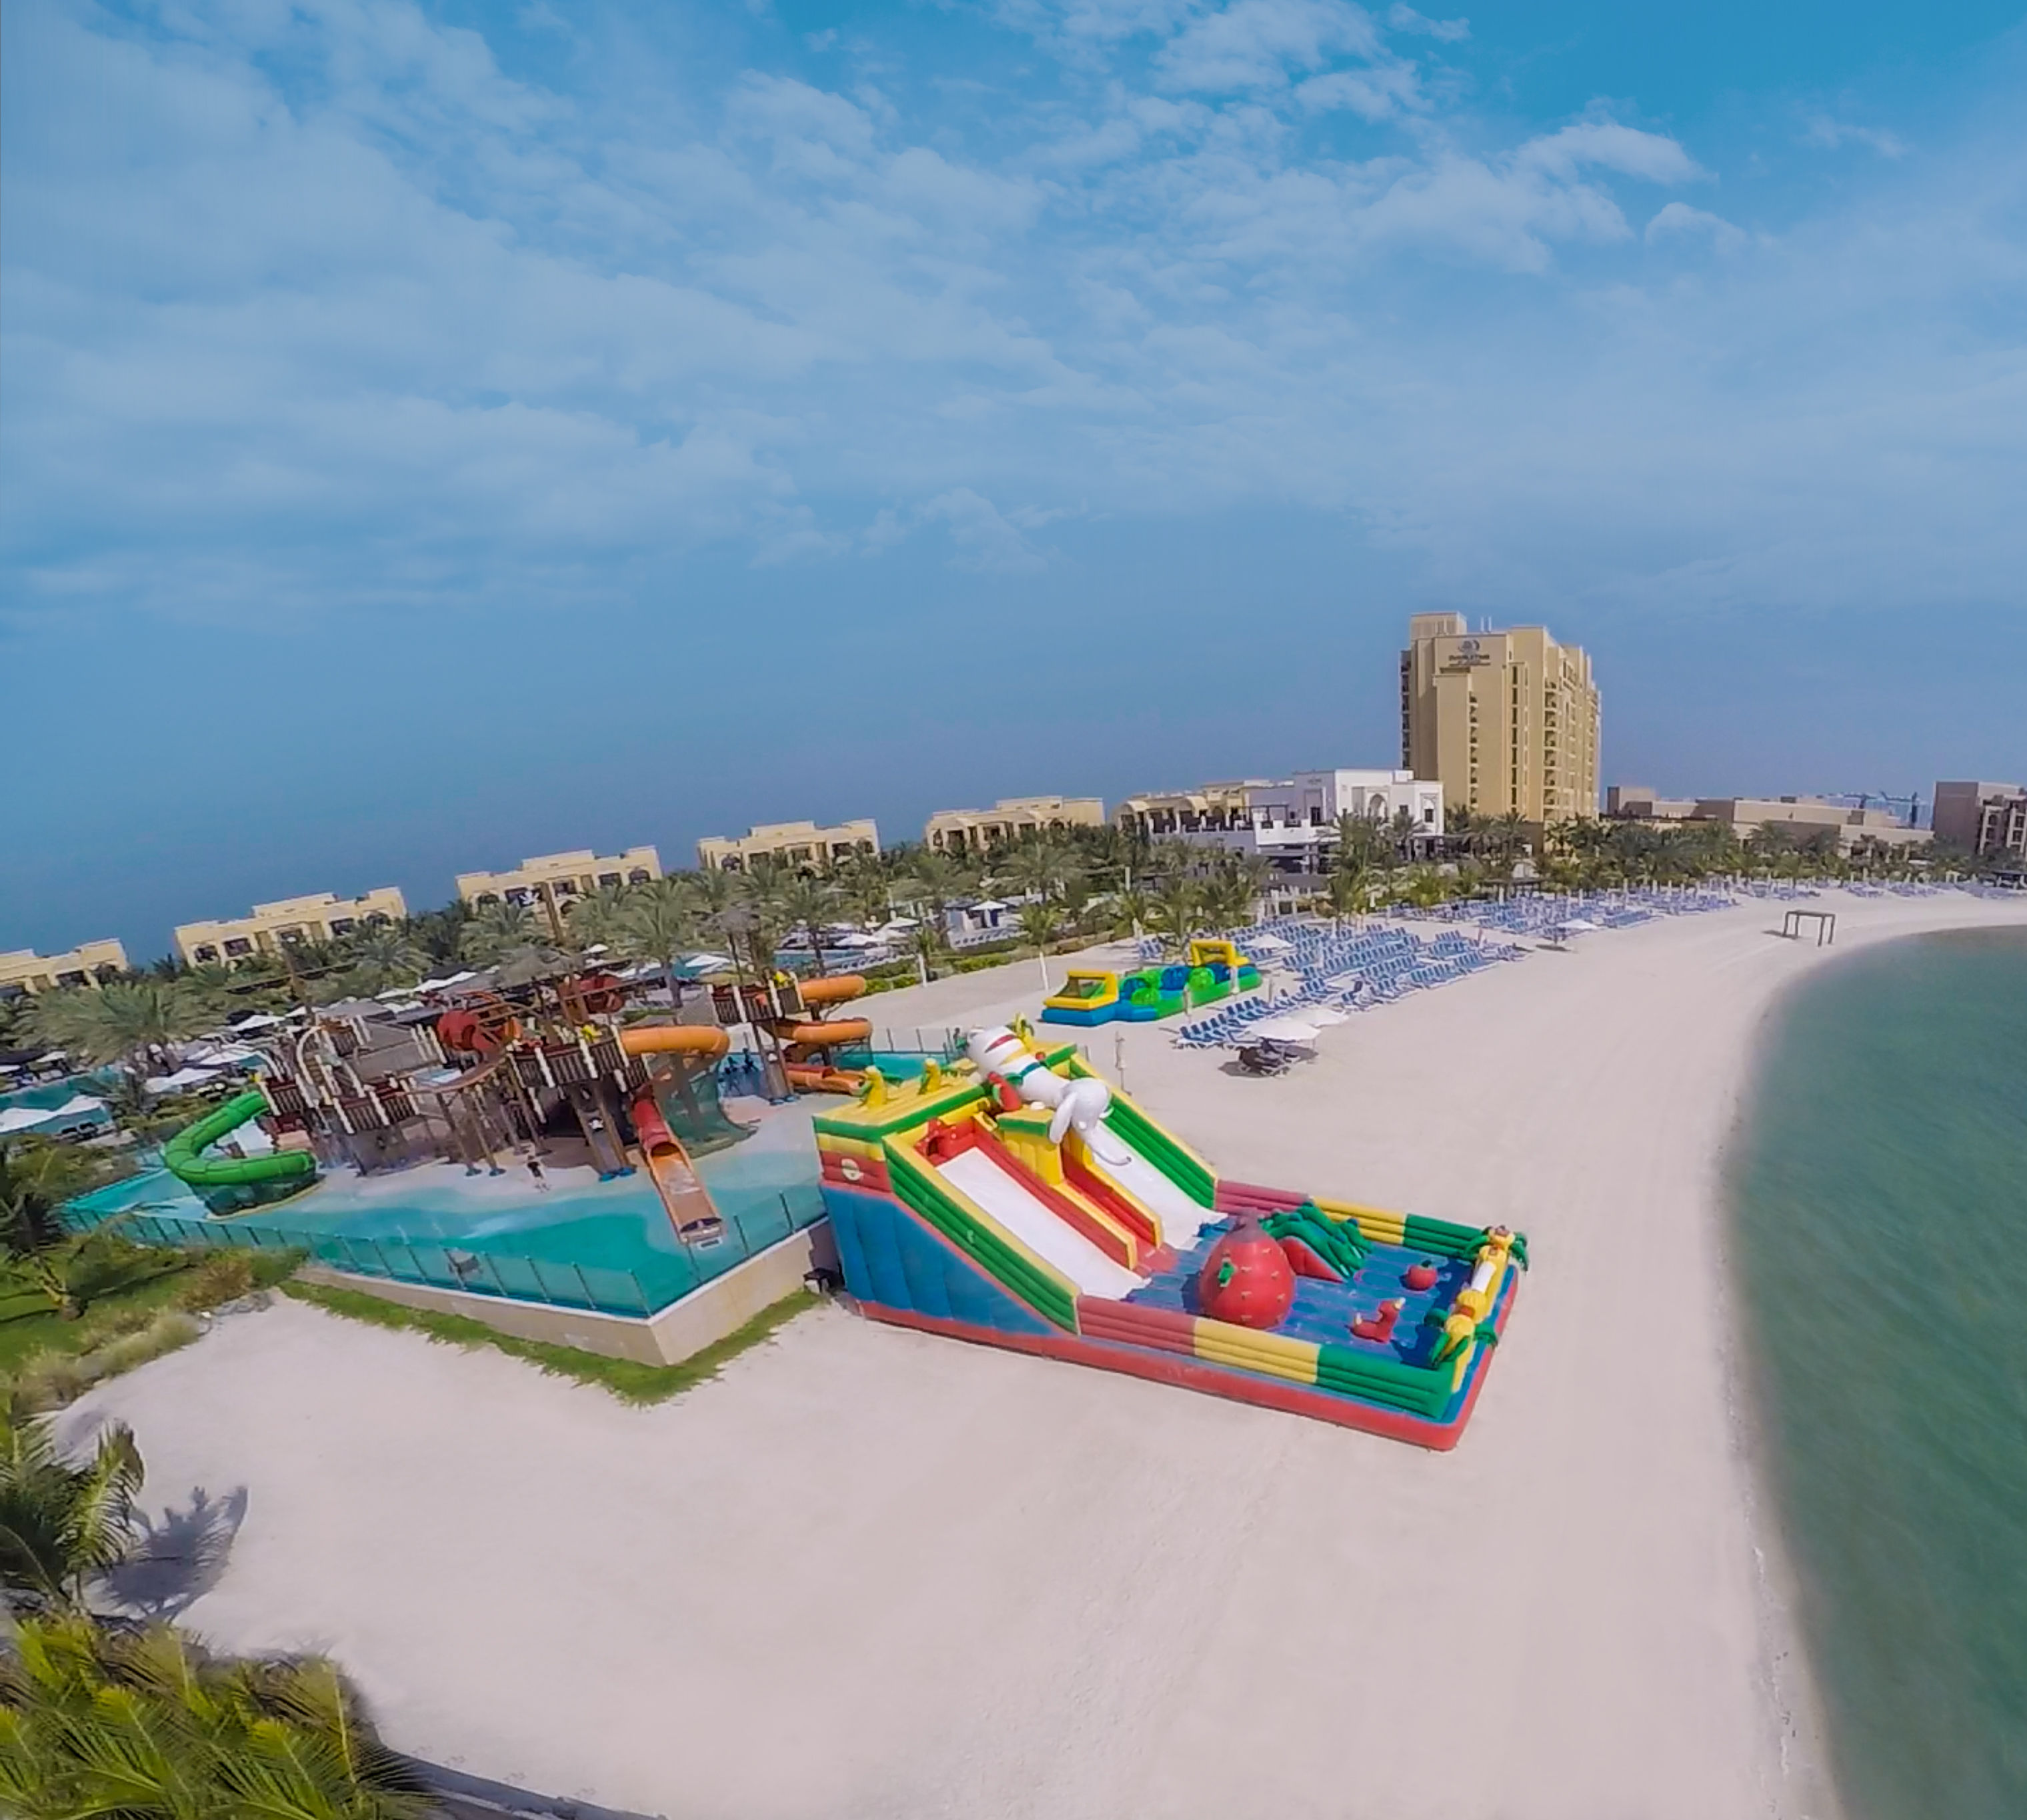 Aerial view of the beach adjacent to the hotel's waterpark, and bounce castle.